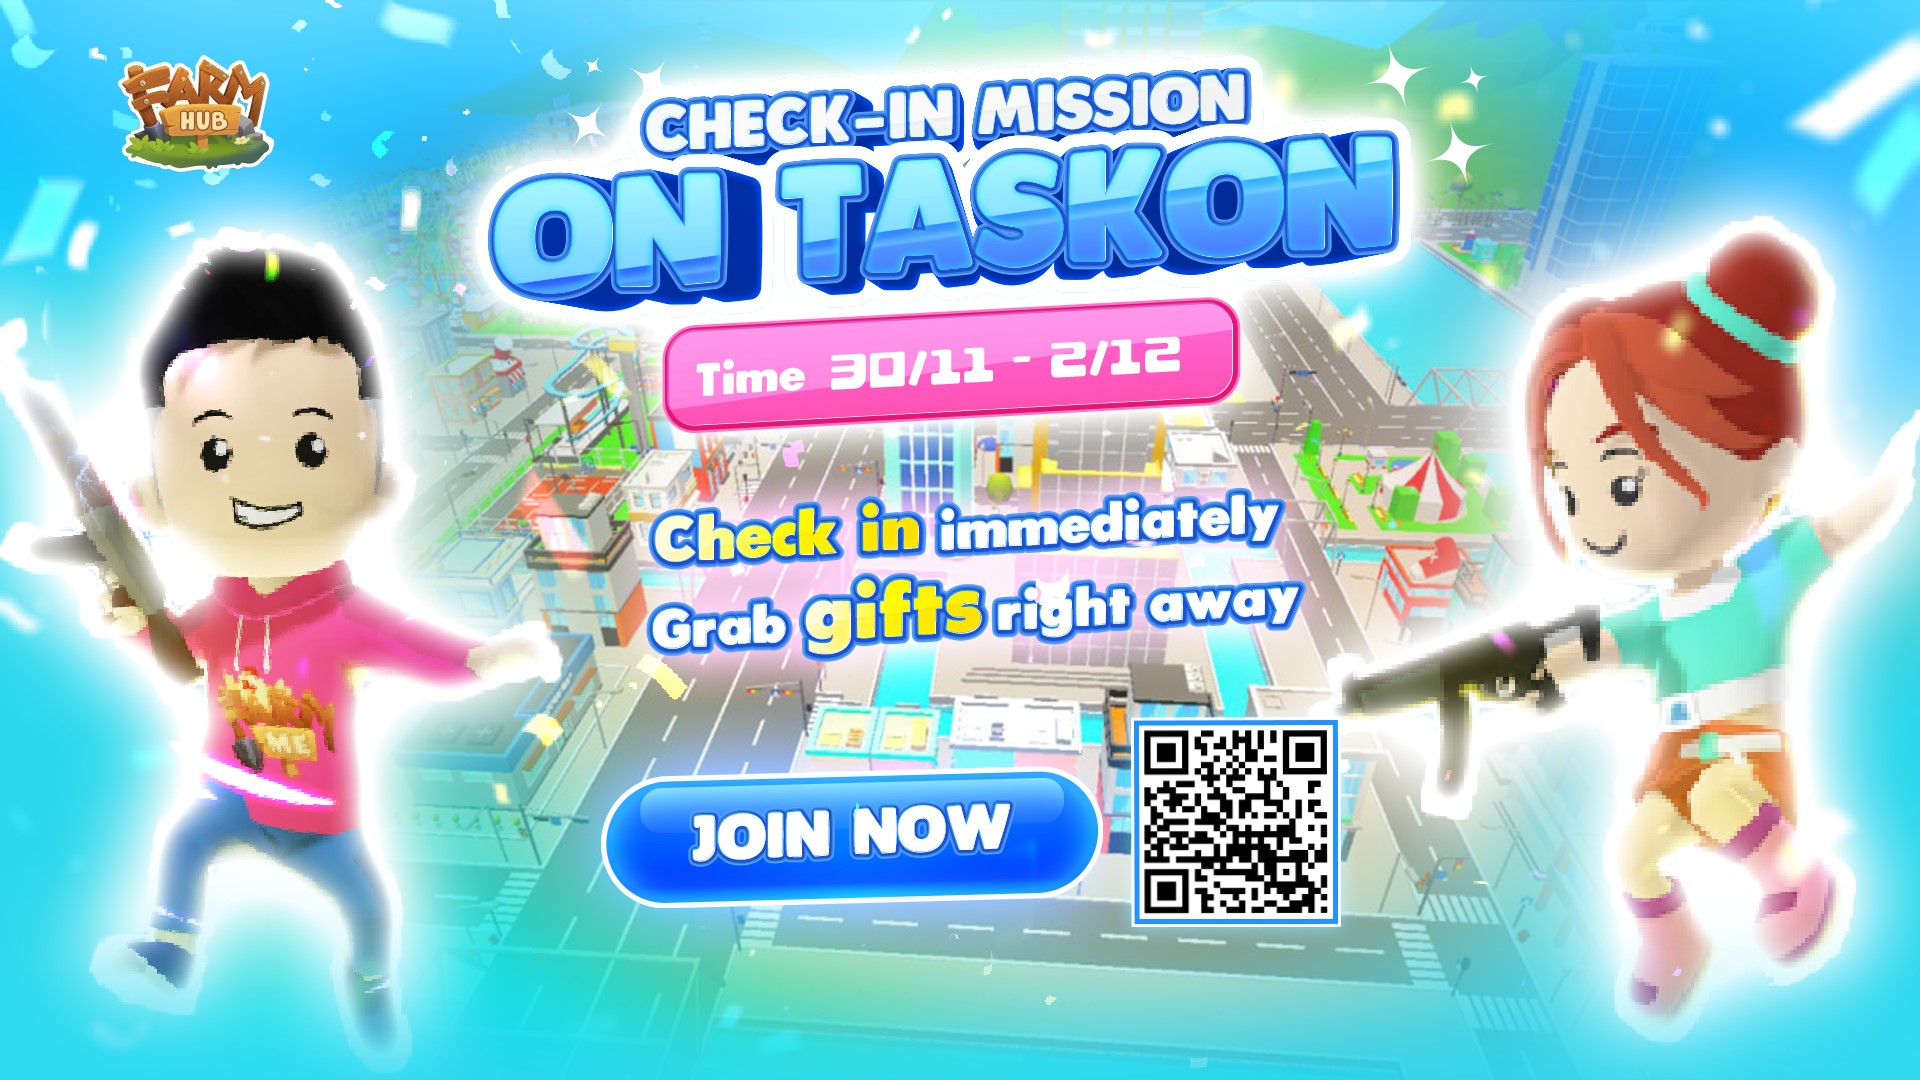 EVENT: CHECK-IN MISSION ON TASKON